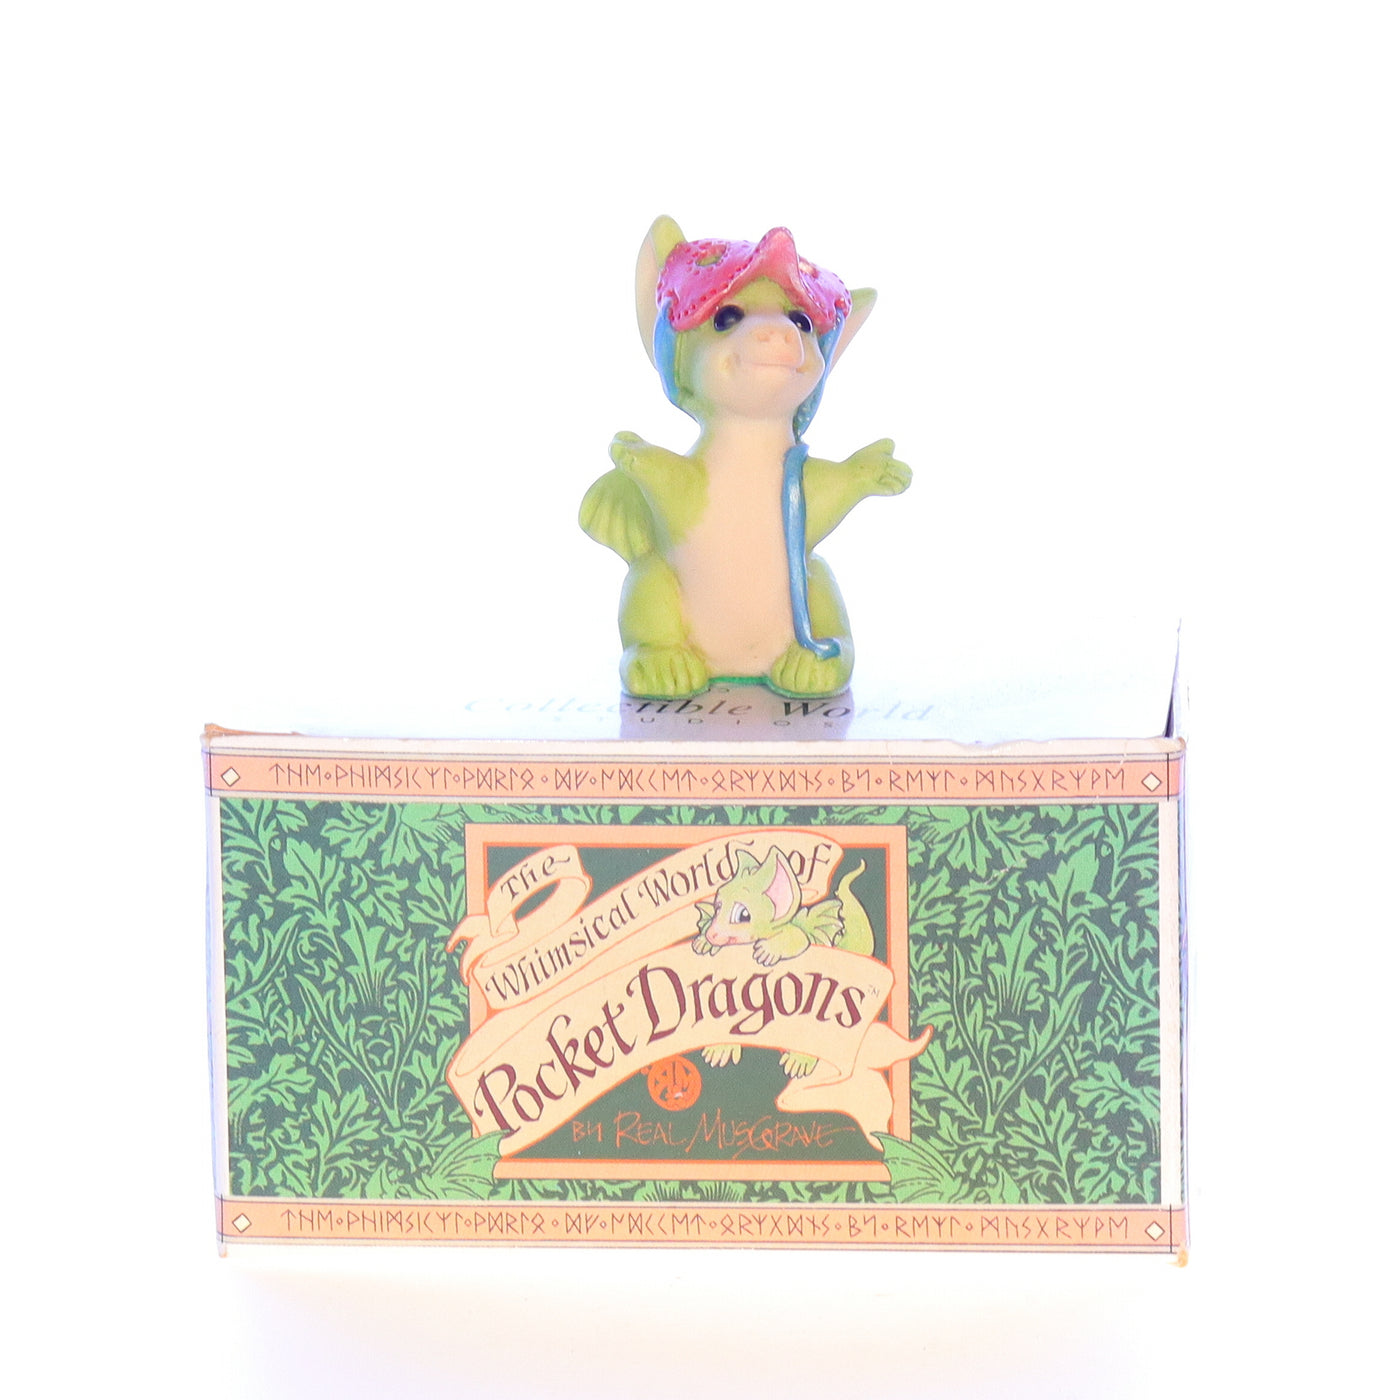 Whimsical_World_of_Pocket_Dragons_002853_Its_Me_Halloween_Figurine_1997_Box Front View